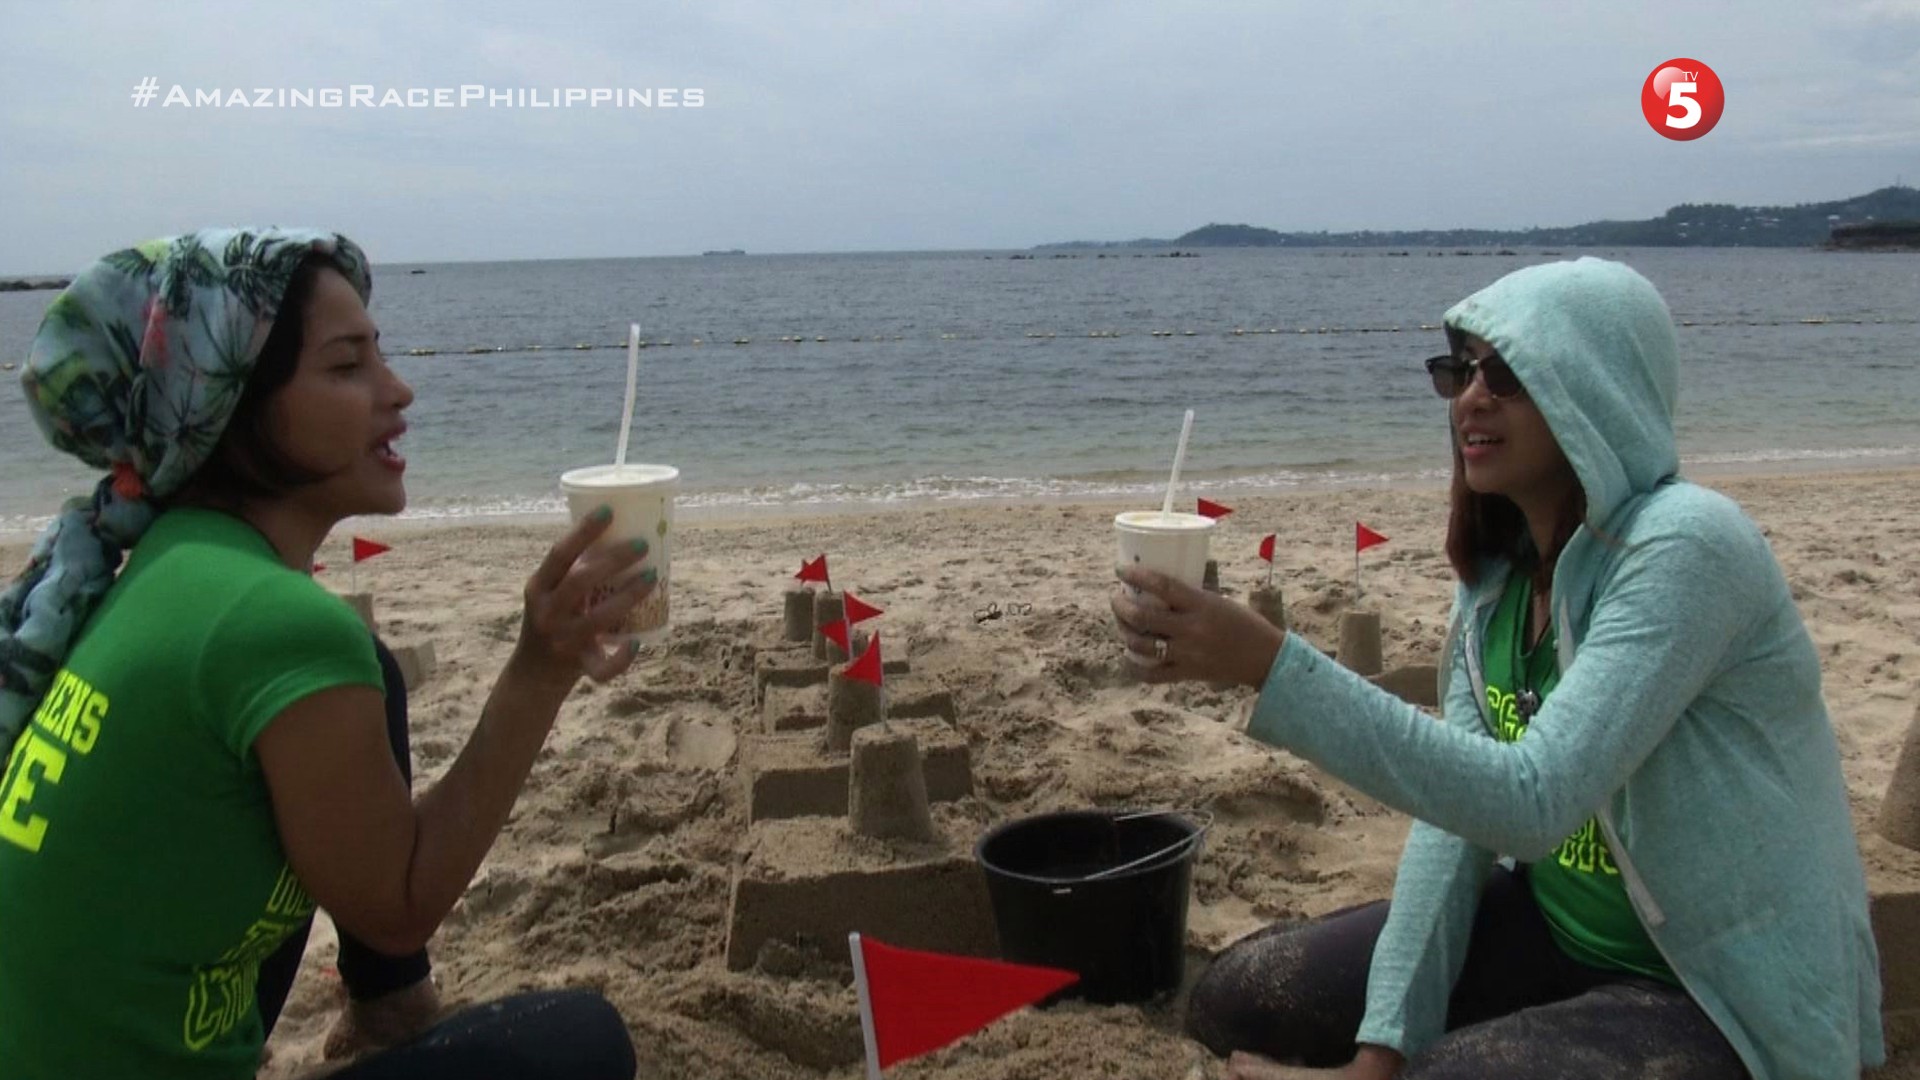 Recap: The Amazing Race Philippines 2, Episode 11 (Leg 2, Day 5) – "I told you, miracles happens."